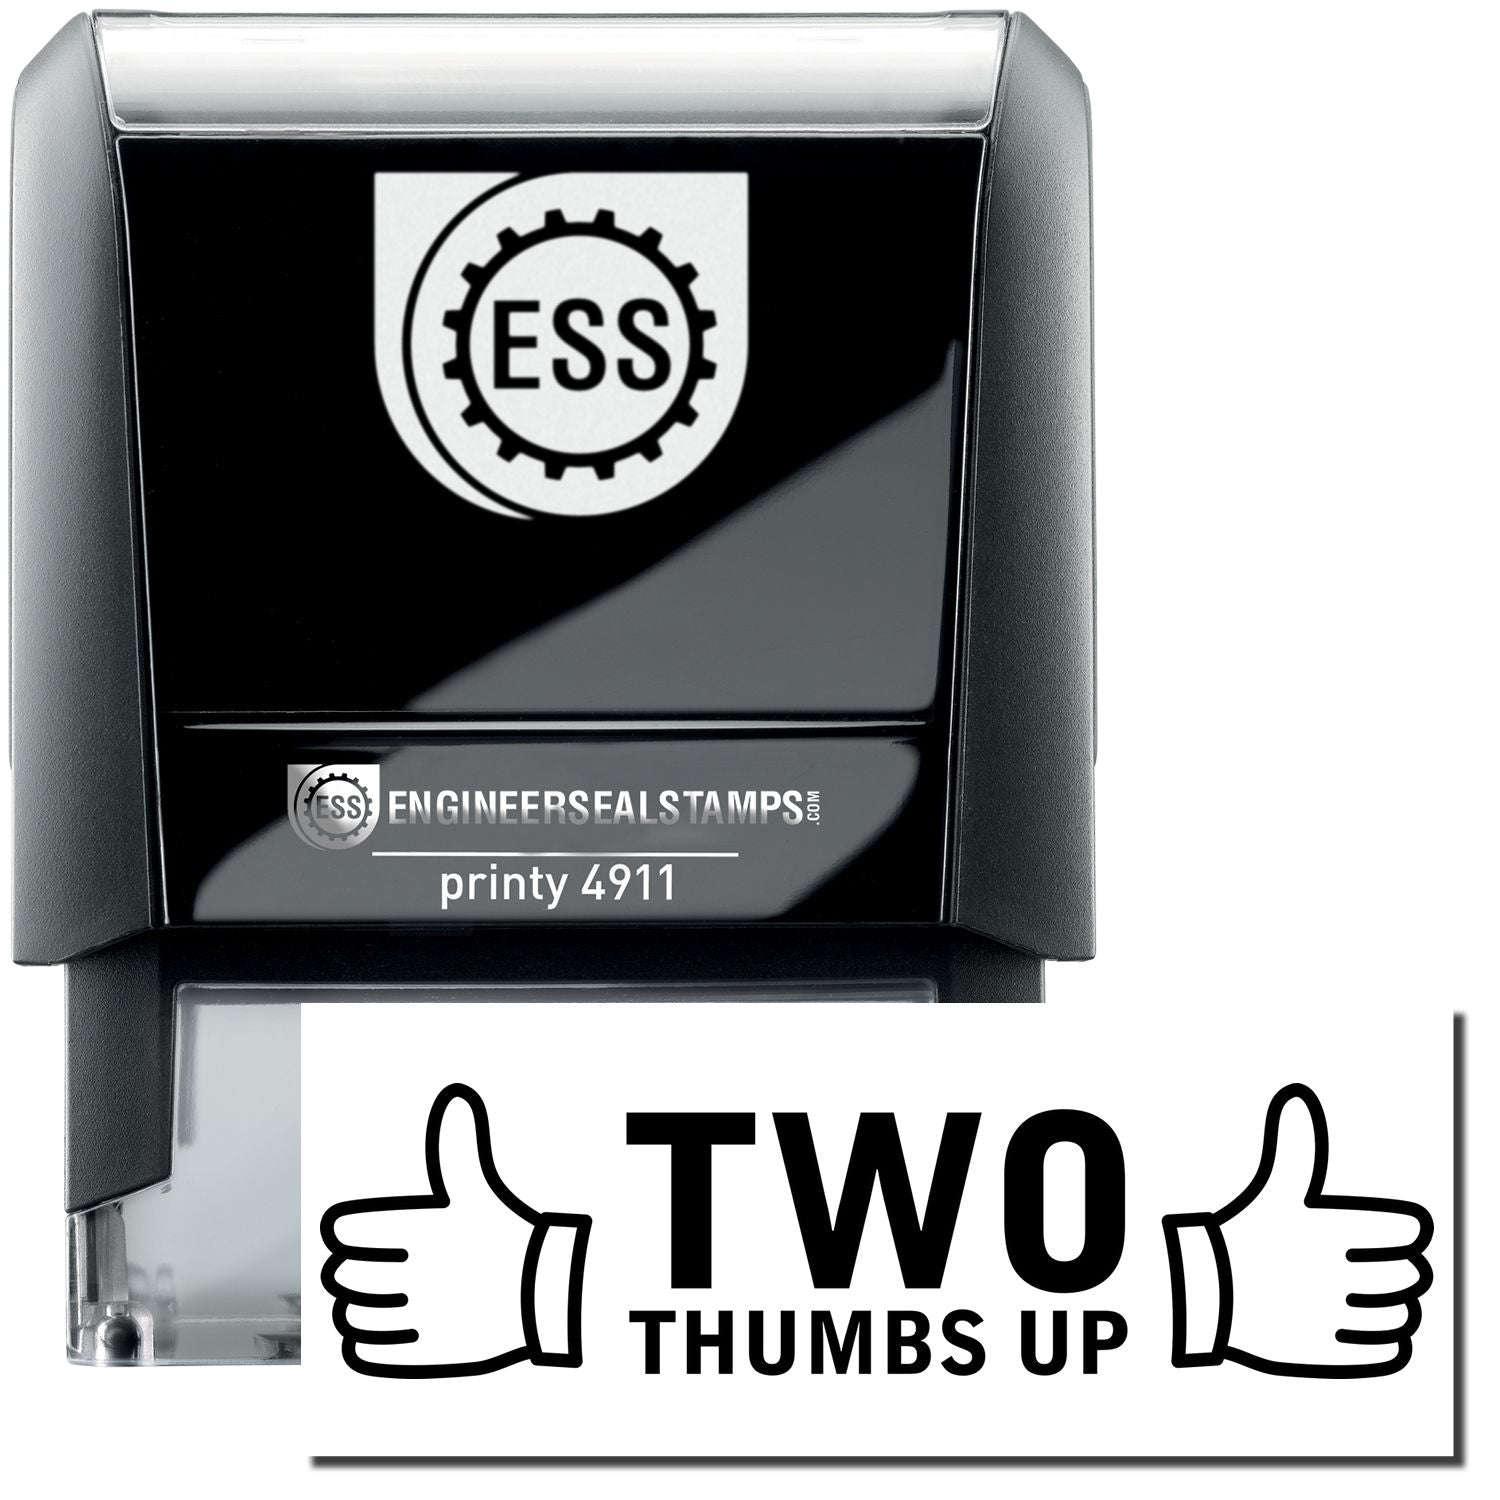 A self-inking stamp with a stamped image showing how the text "TWO THUMBS UP" ("TWO" in a large font and "THUMBS UP" in a small font mentioned underneath with two thumbs pointing up on each side of the text) is displayed after stamping.